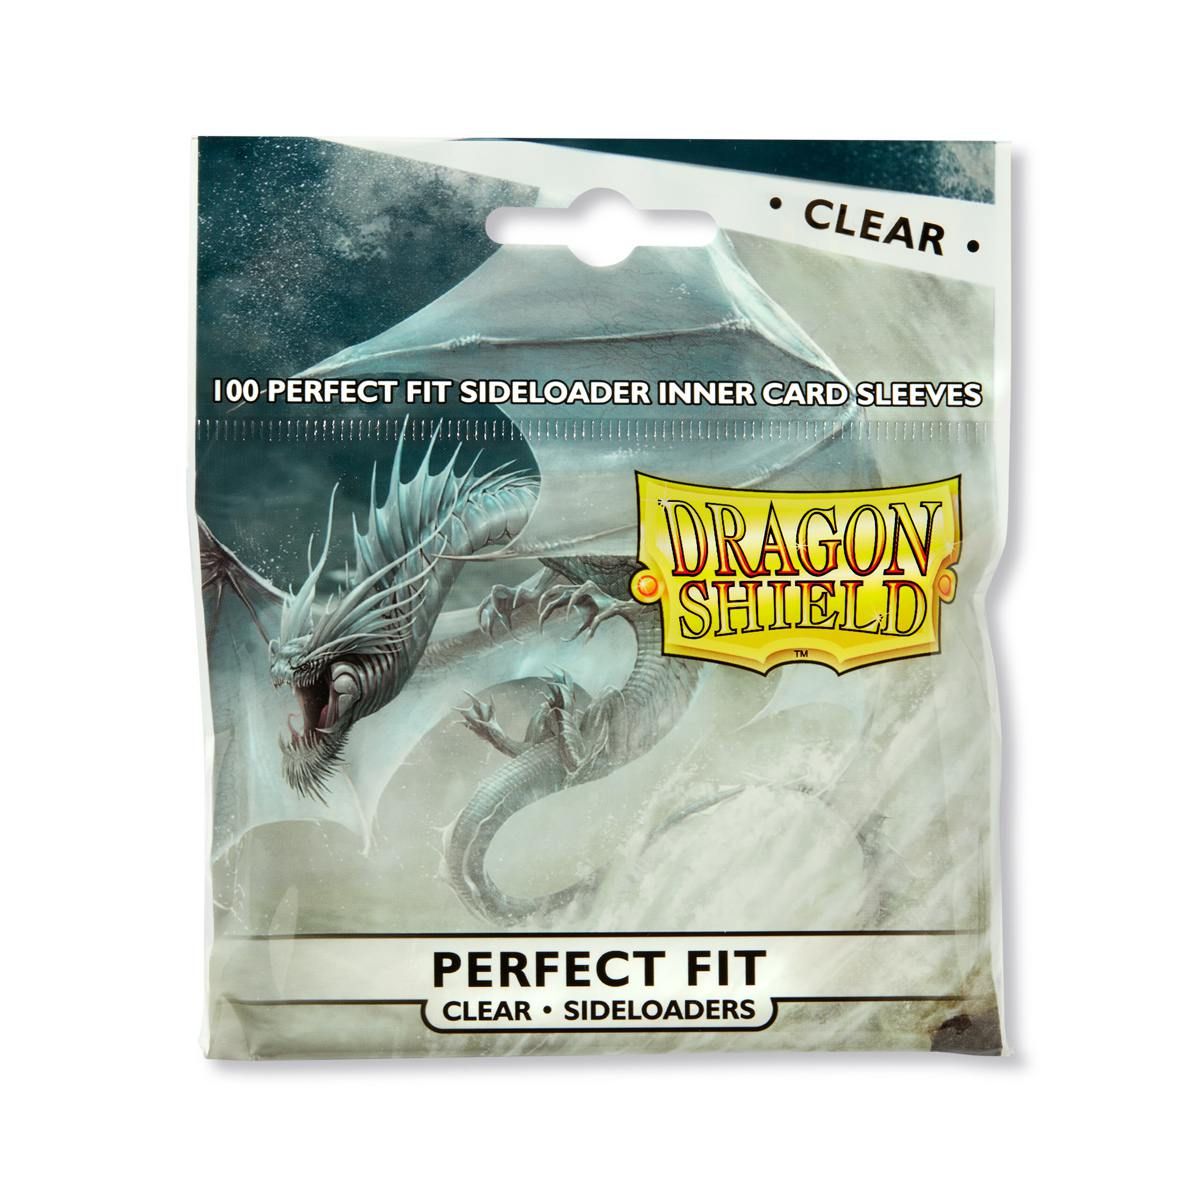 Dragon Shield: Standard Size 100ct Inner Sleeves - Perfect Fit Sideloader (Clear)